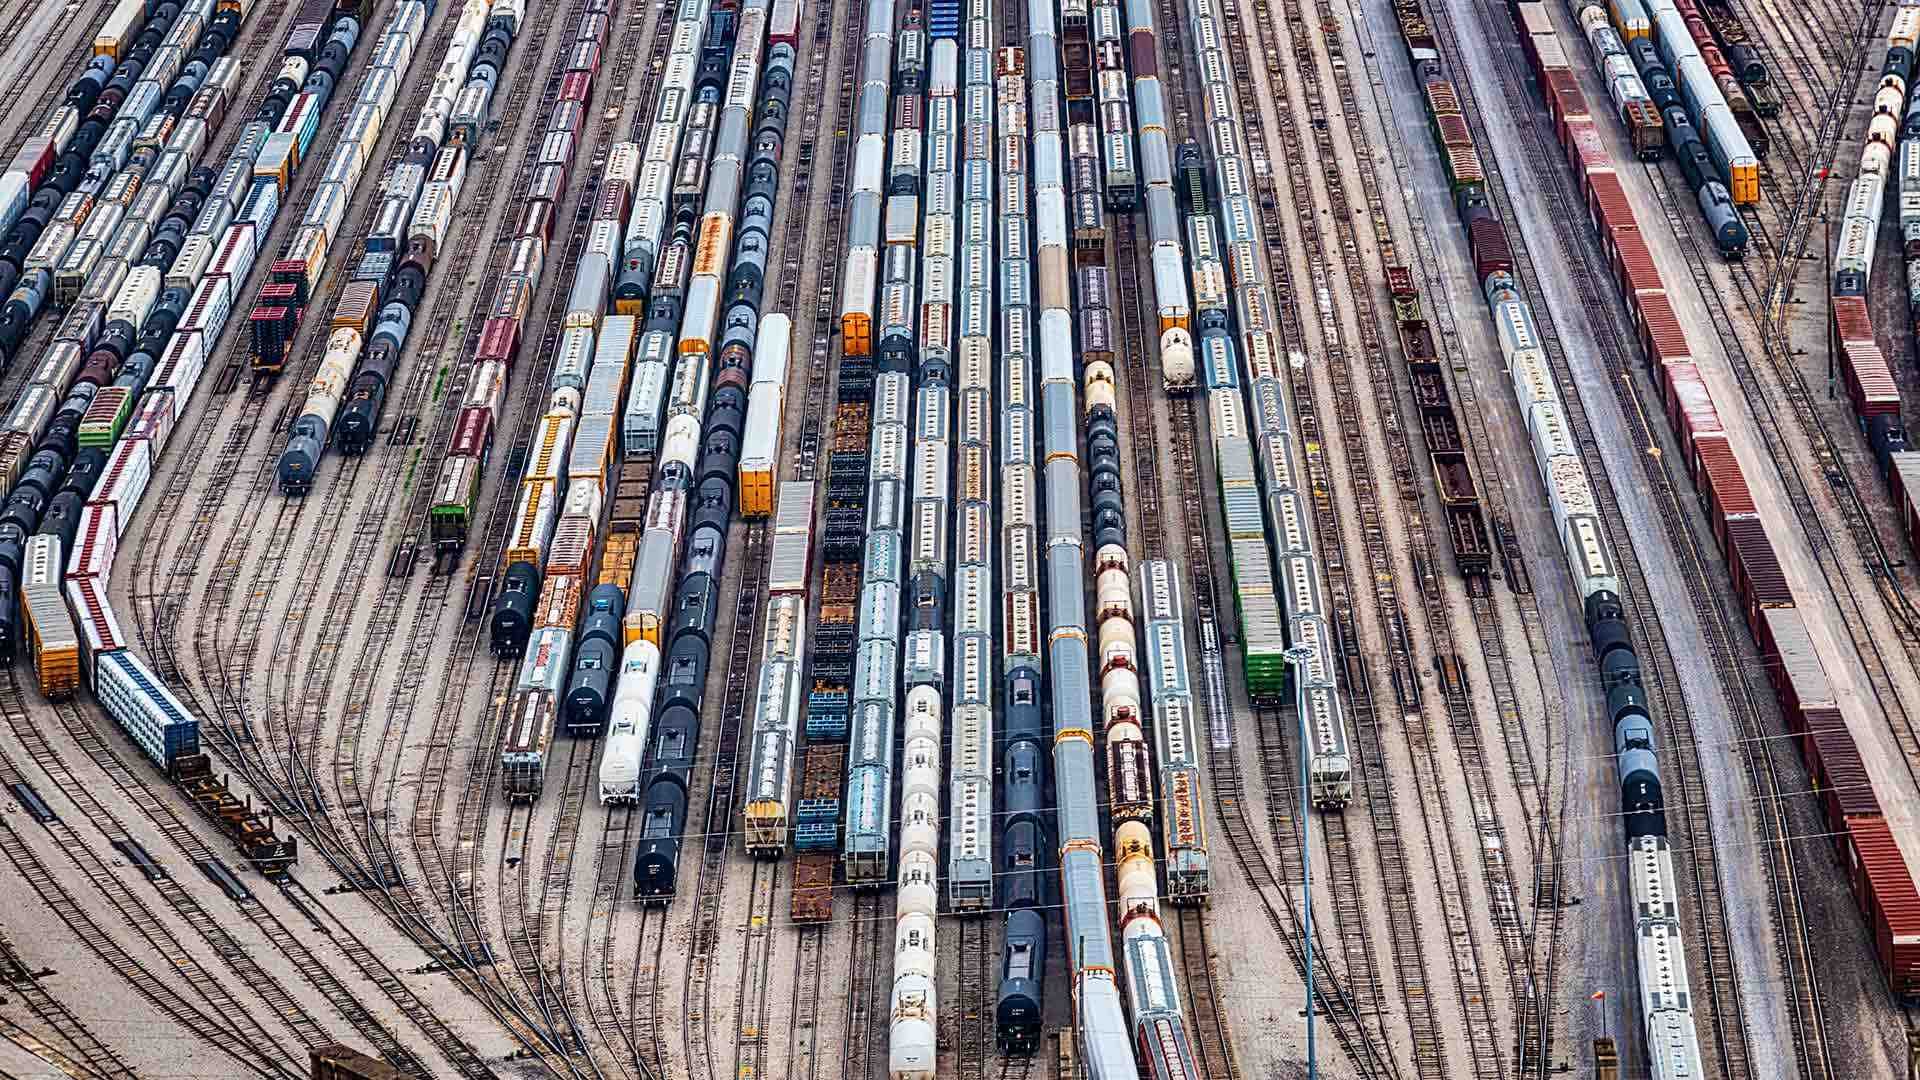 Aerial view of a large rail yard